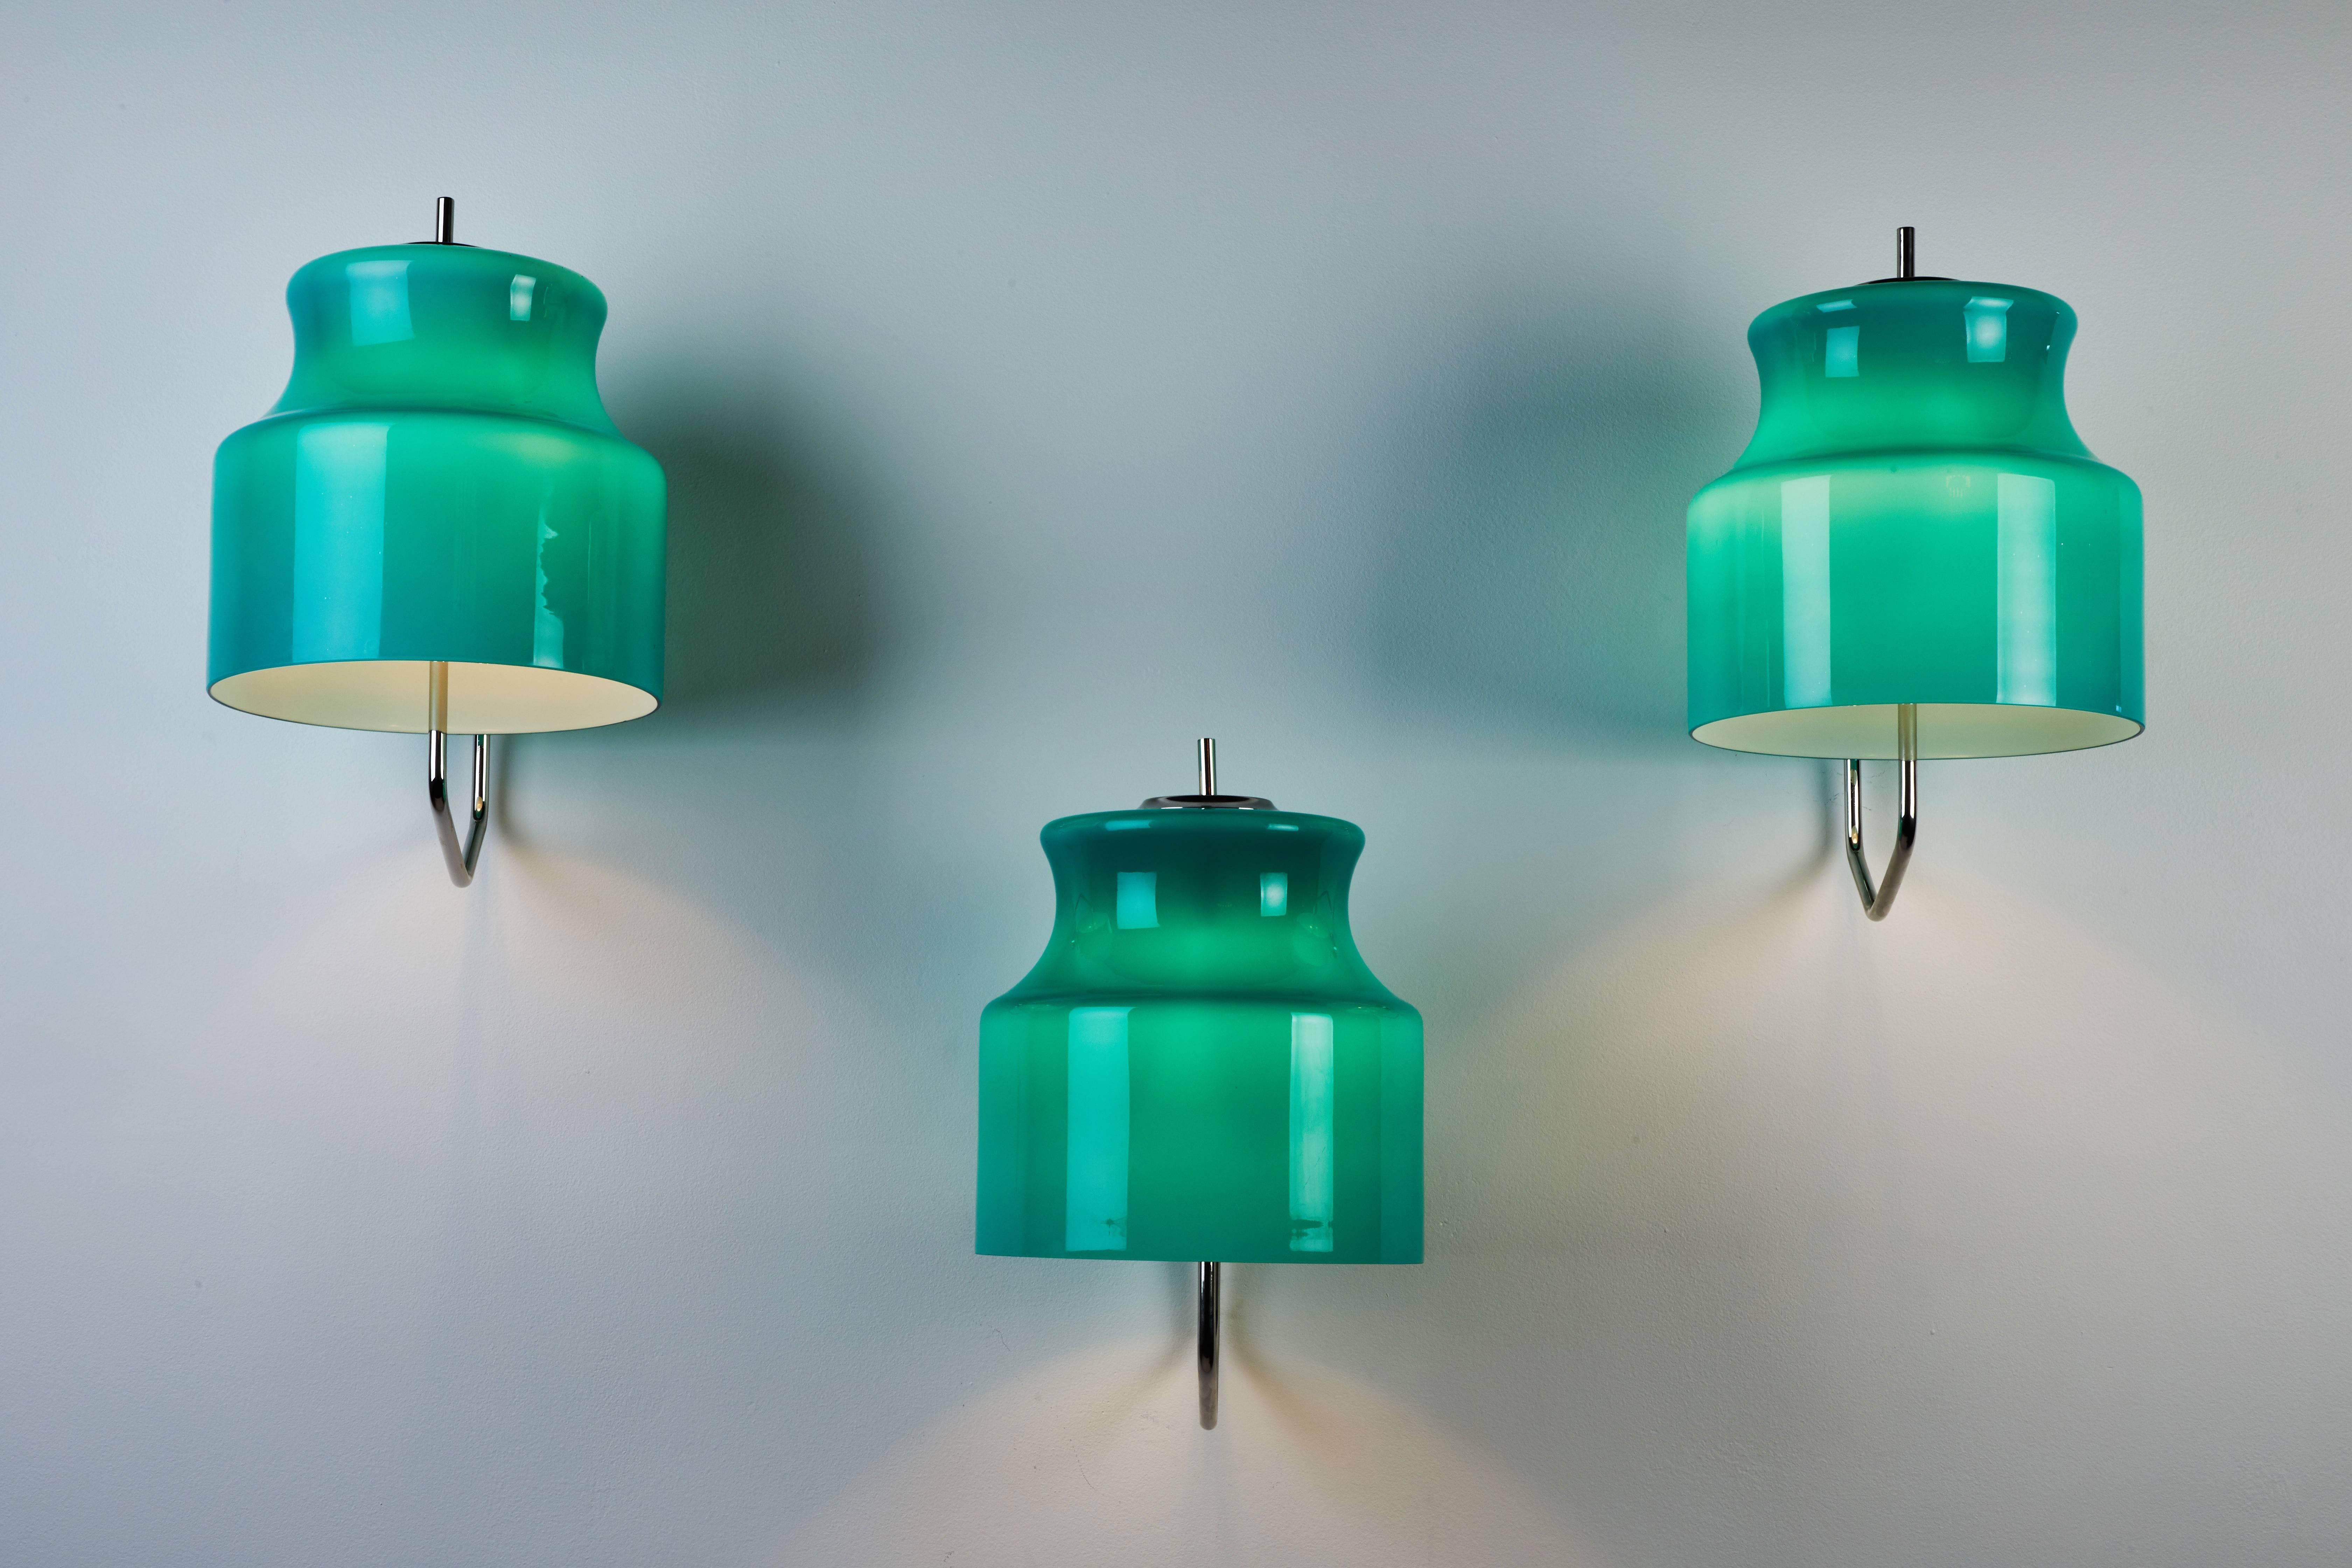 Three original blown glass sconces by Venini designed in Italy, circa 1960s. Re-plated to original nickel-plated brass finish. Custom nickel-plated brass backplates. Wired for US junction boxes. Sold and priced individually. Each light takes one E26